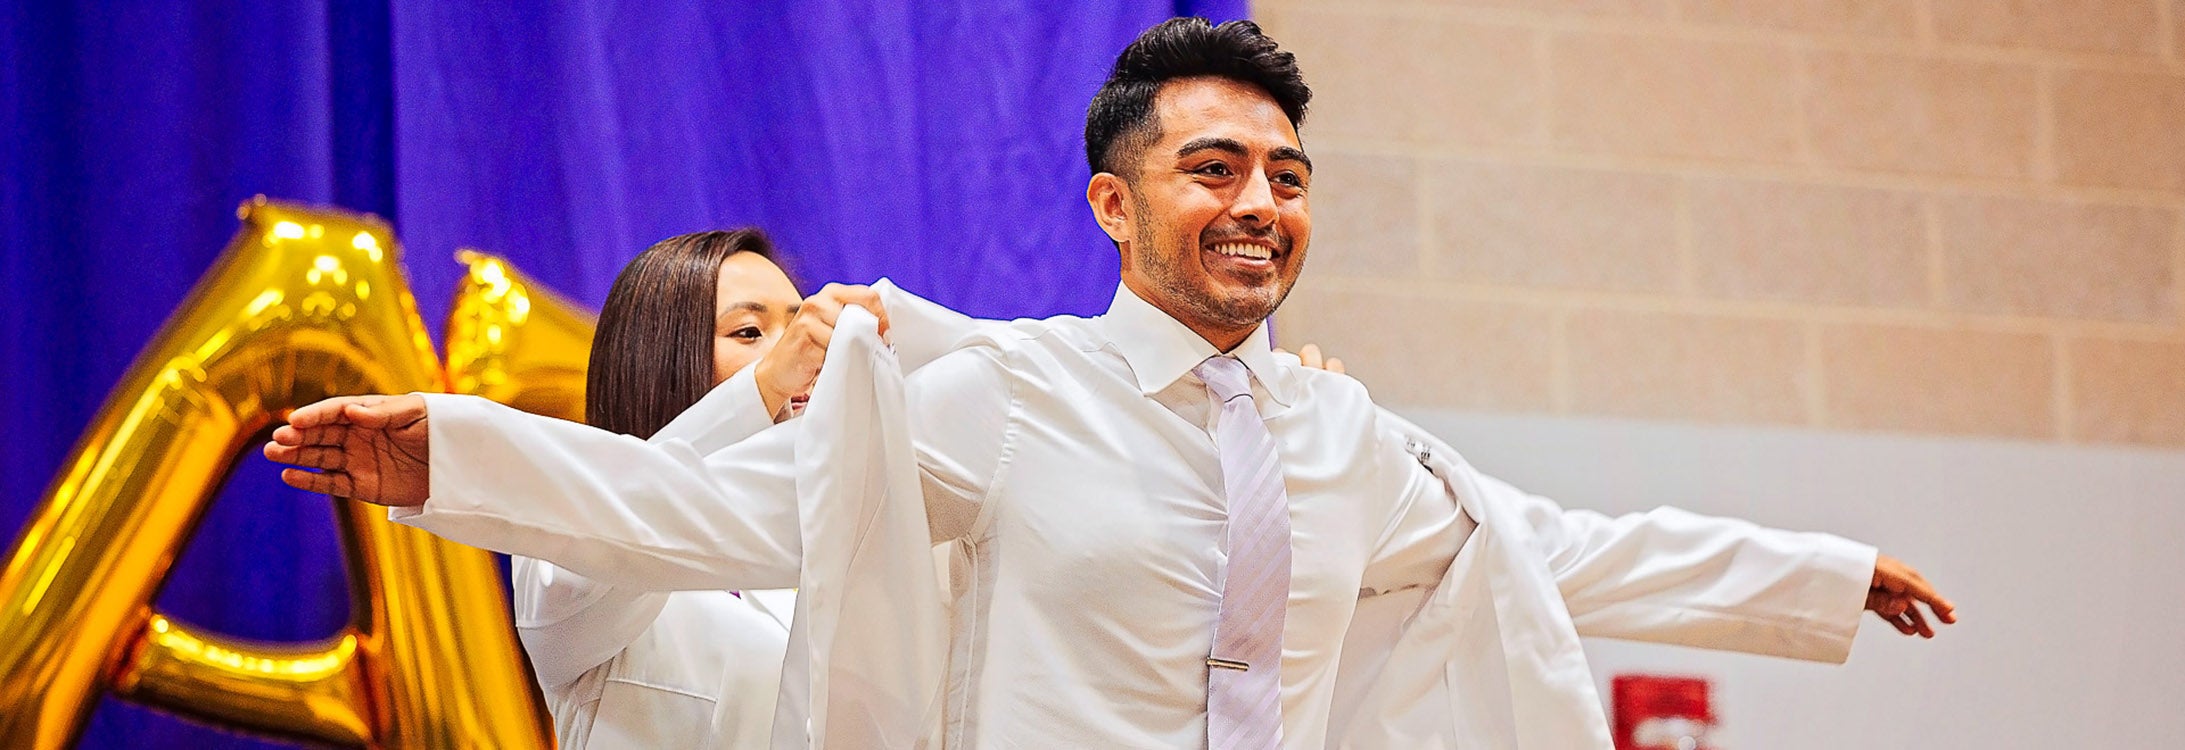 First-year medical student Haris Shehzad receives his white coat during The Brody School of Medicine at East Carolina University’s annual White Coat Ceremony on July 29.